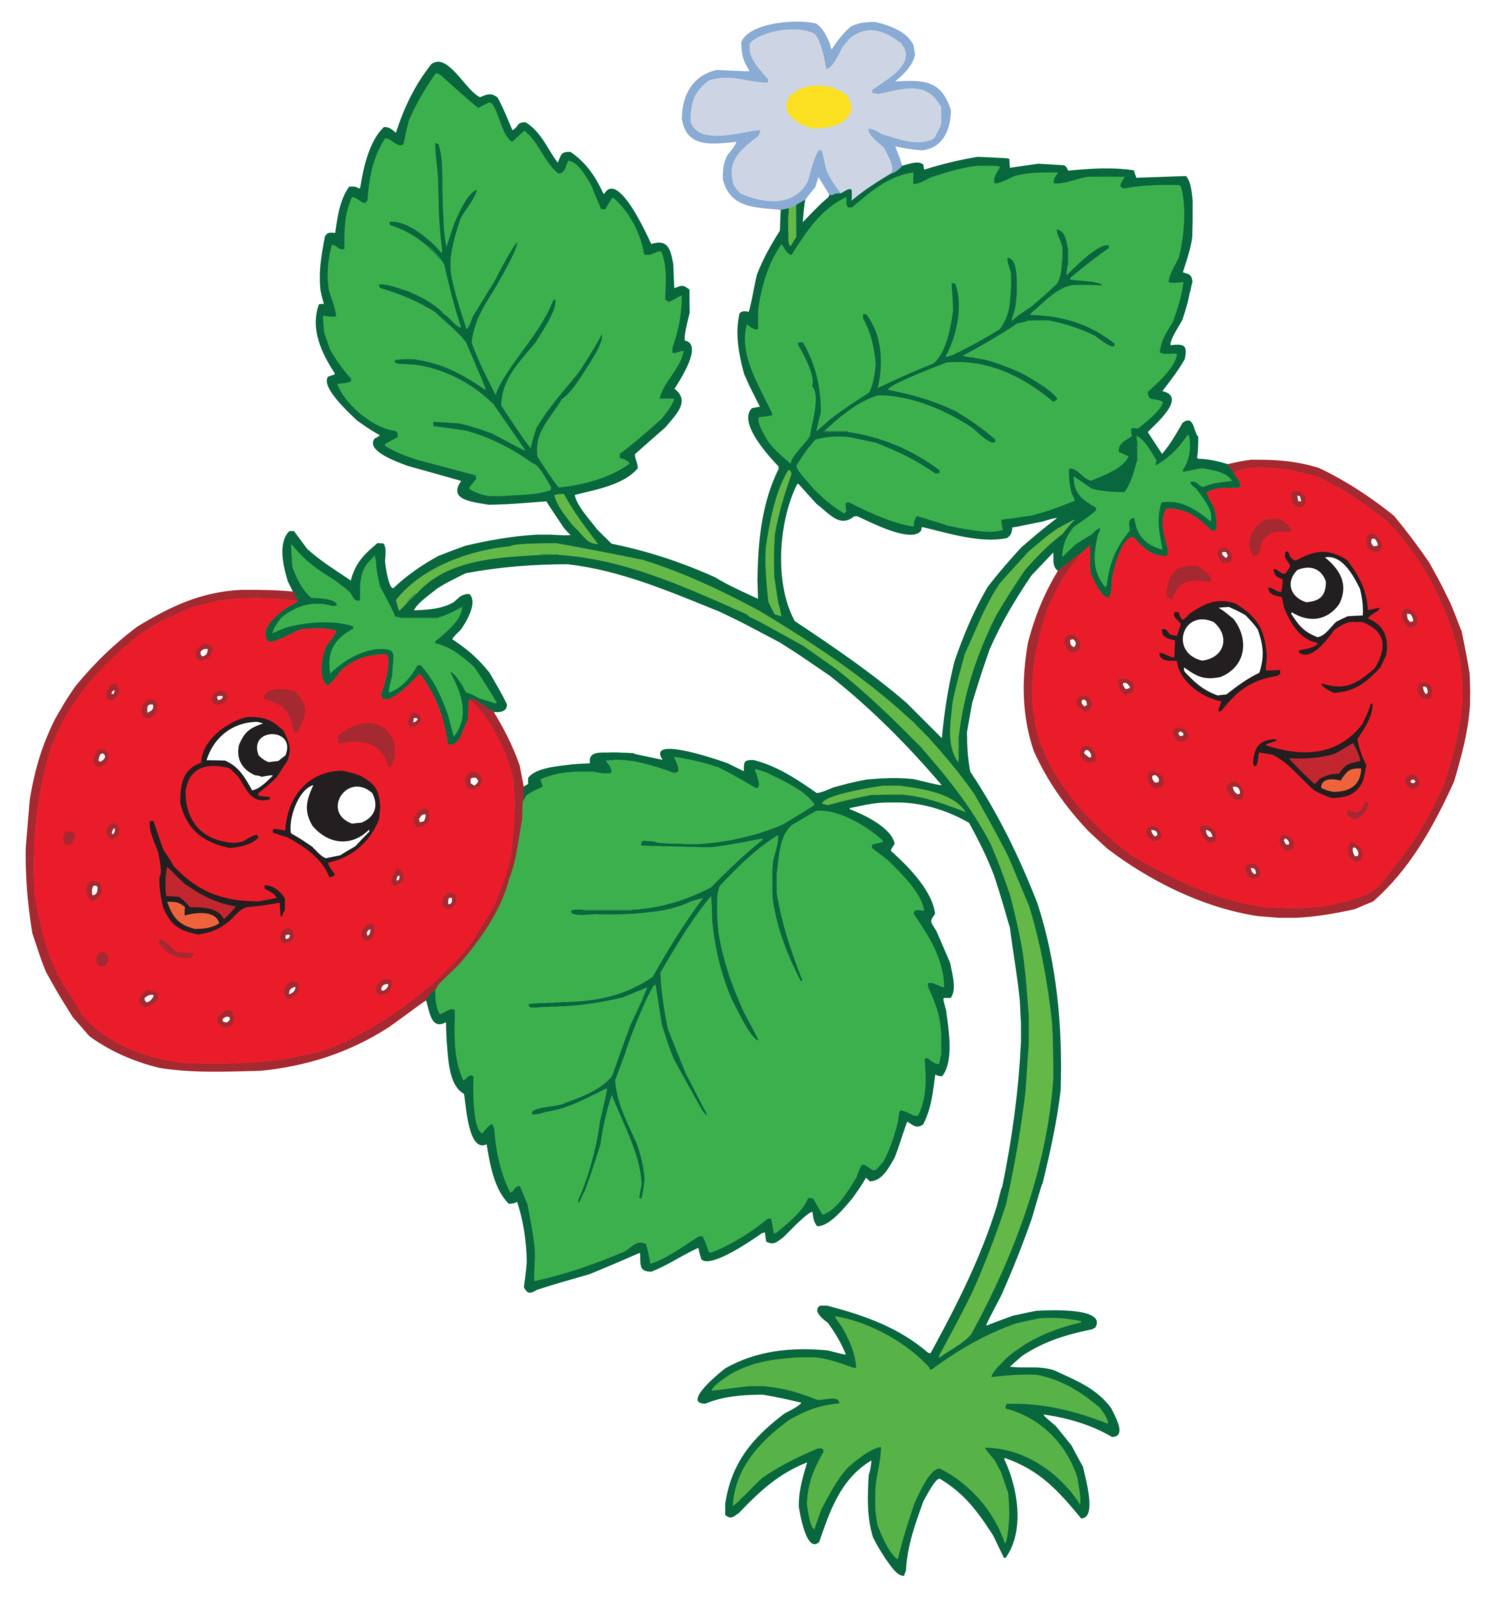 Cute strawberry on white background - vector illustration.